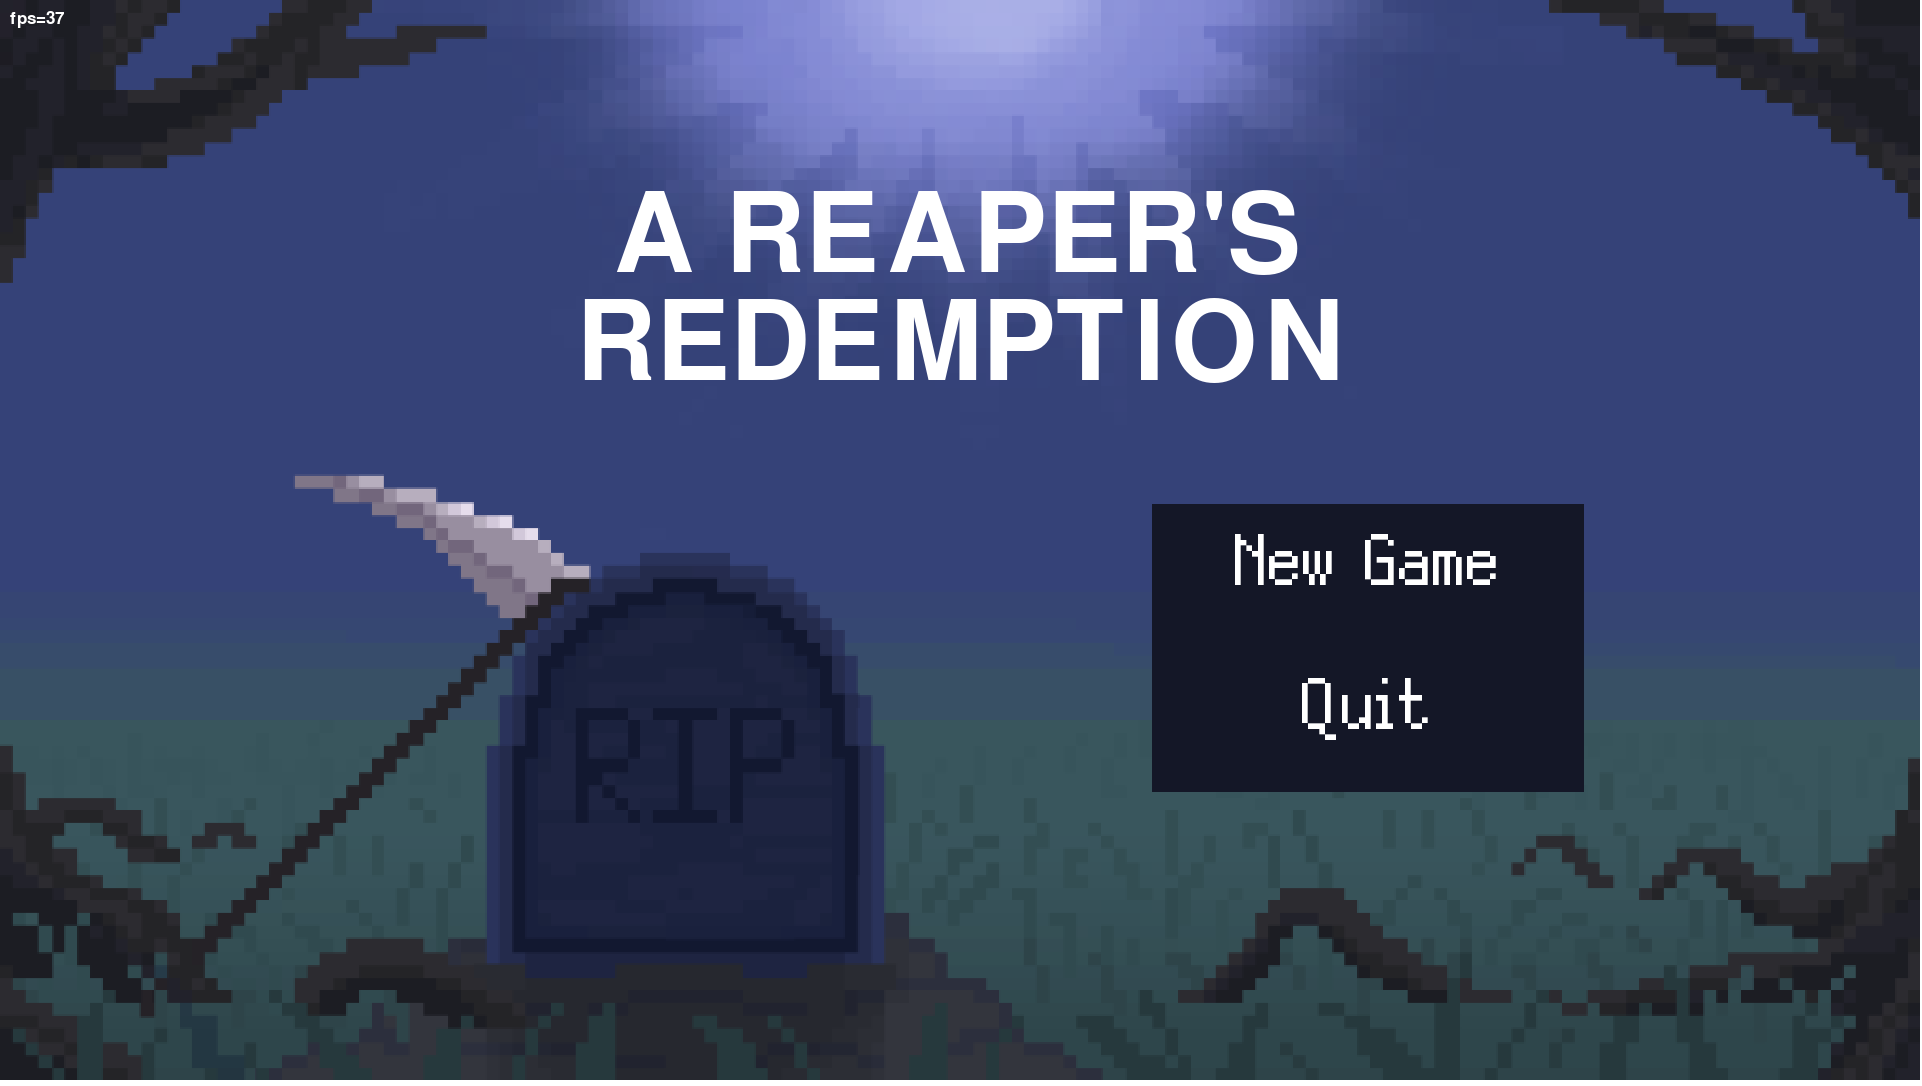 A Reaper's Redemption